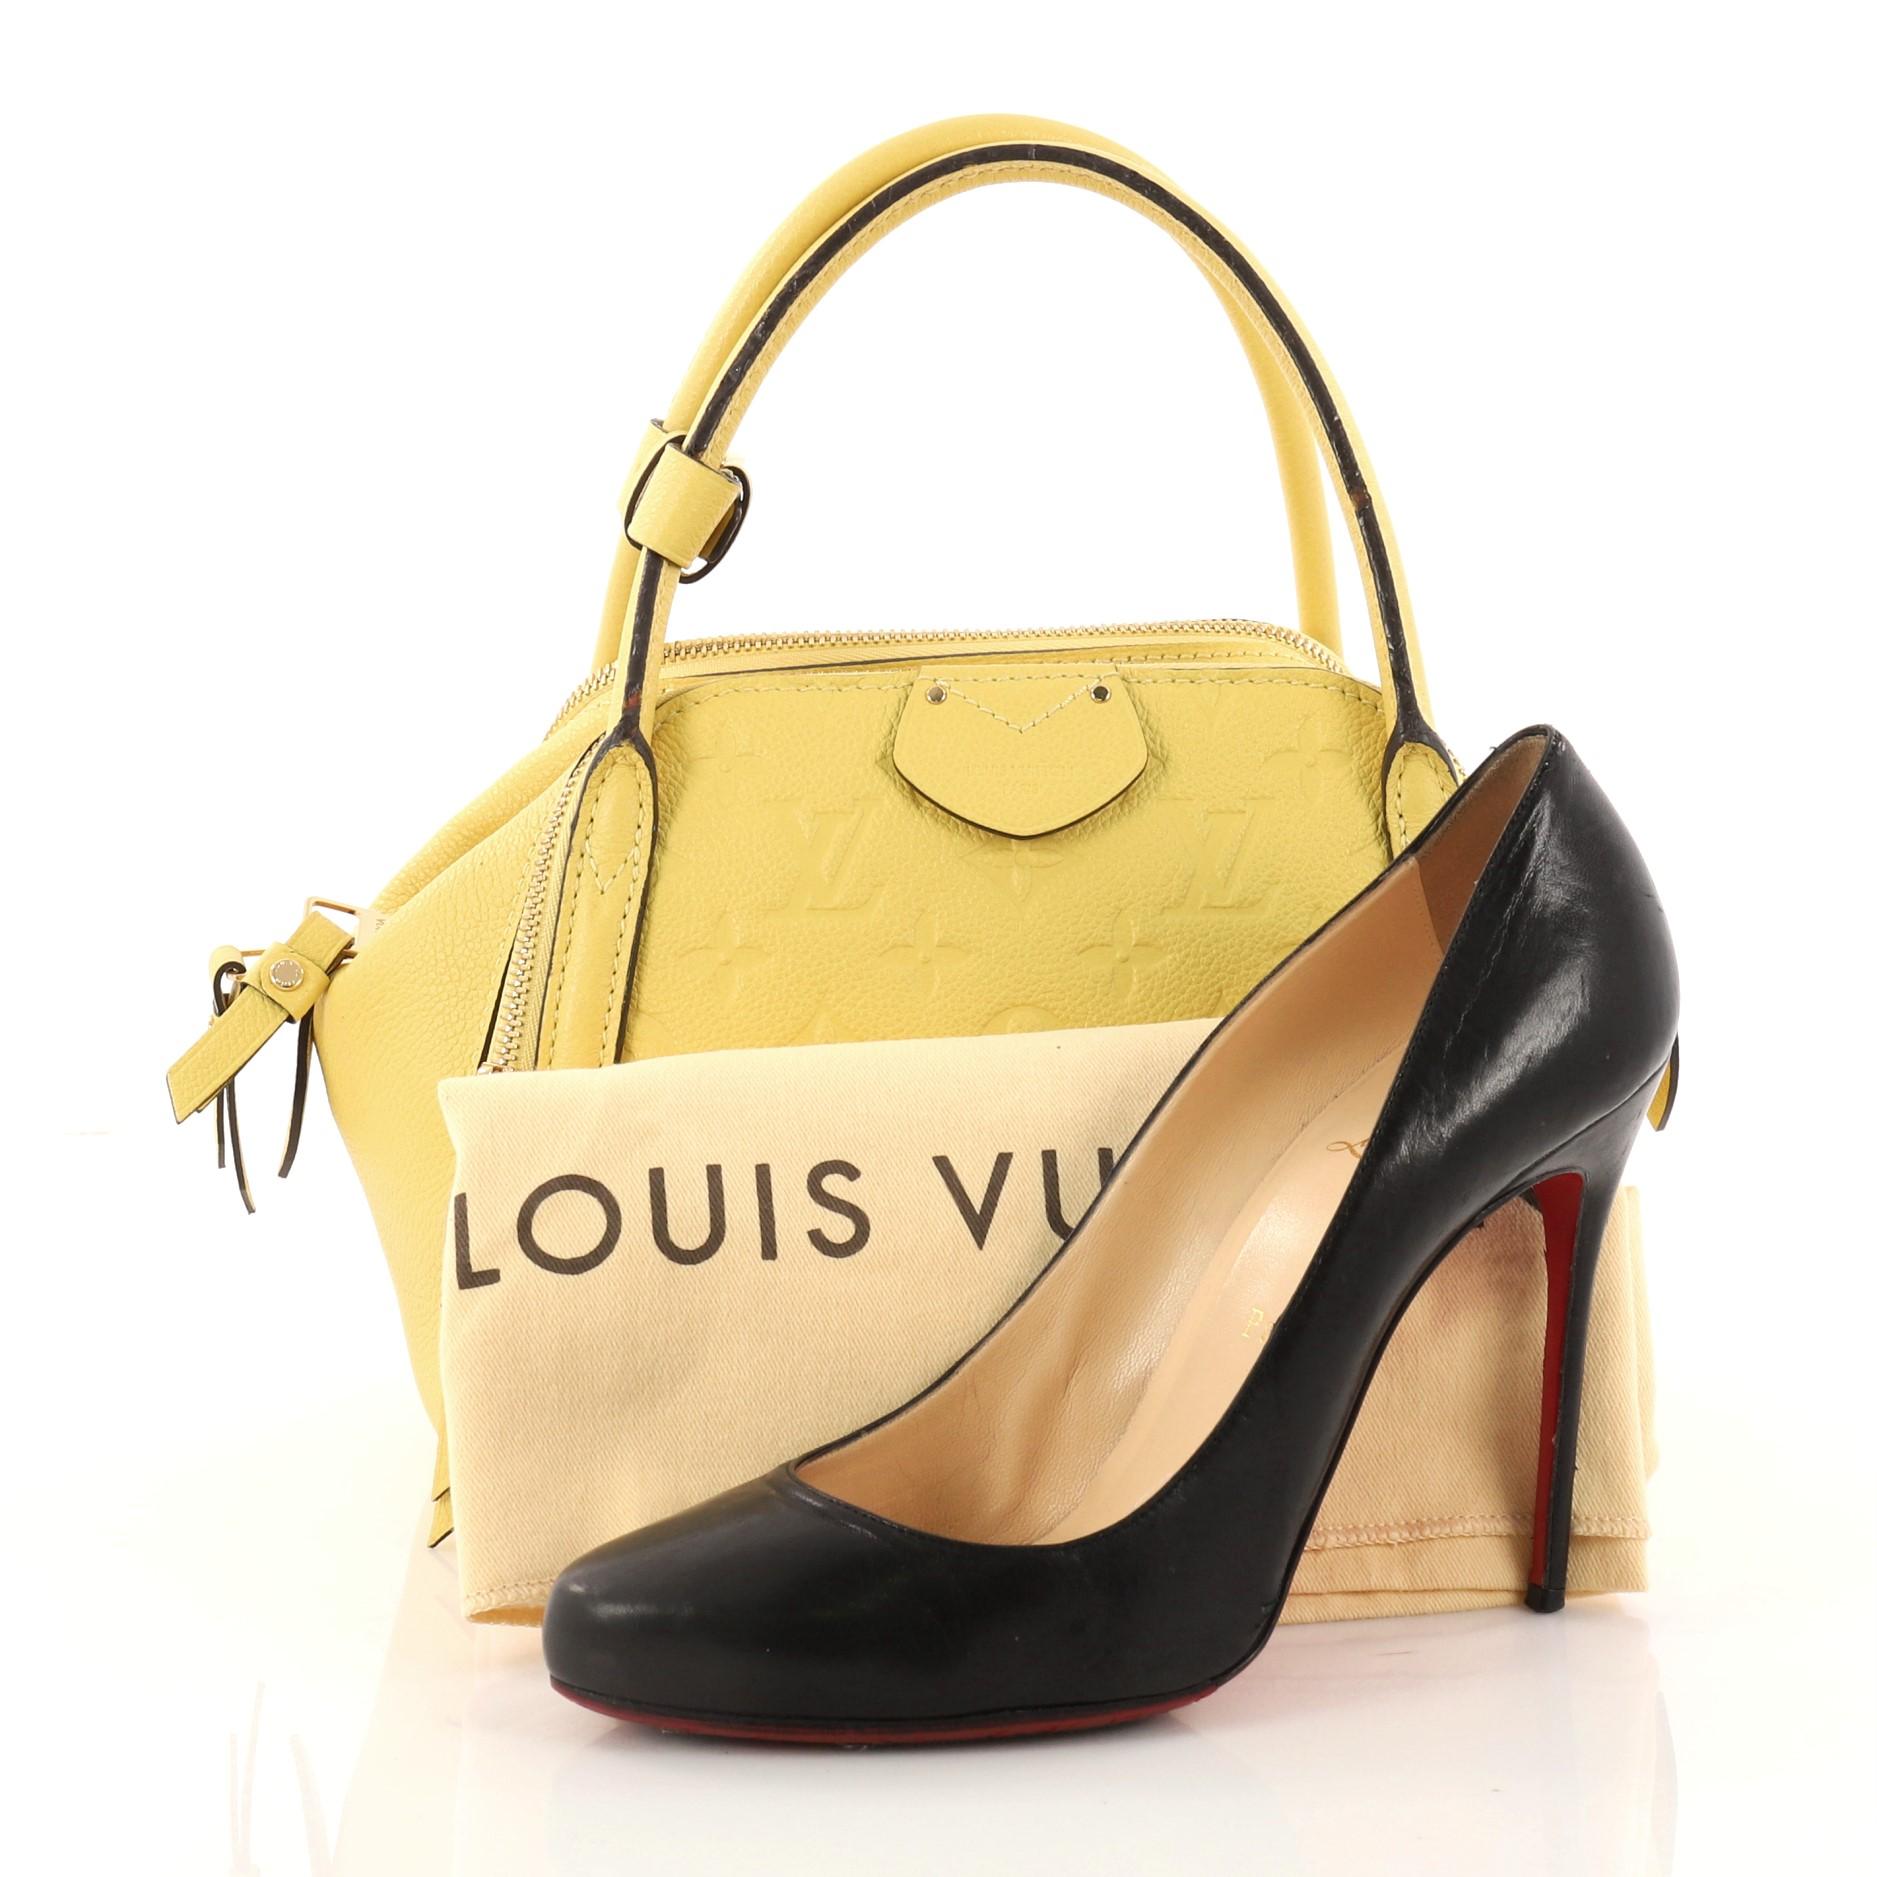 This authentic Louis Vuitton Marais Handbag Monogram Empreinte Leather BB is a re-styling of the classic bowling bag that show casual and chic style made perfect for everyday life. Crafted from yellow monogram empreinte leather, this bowler features